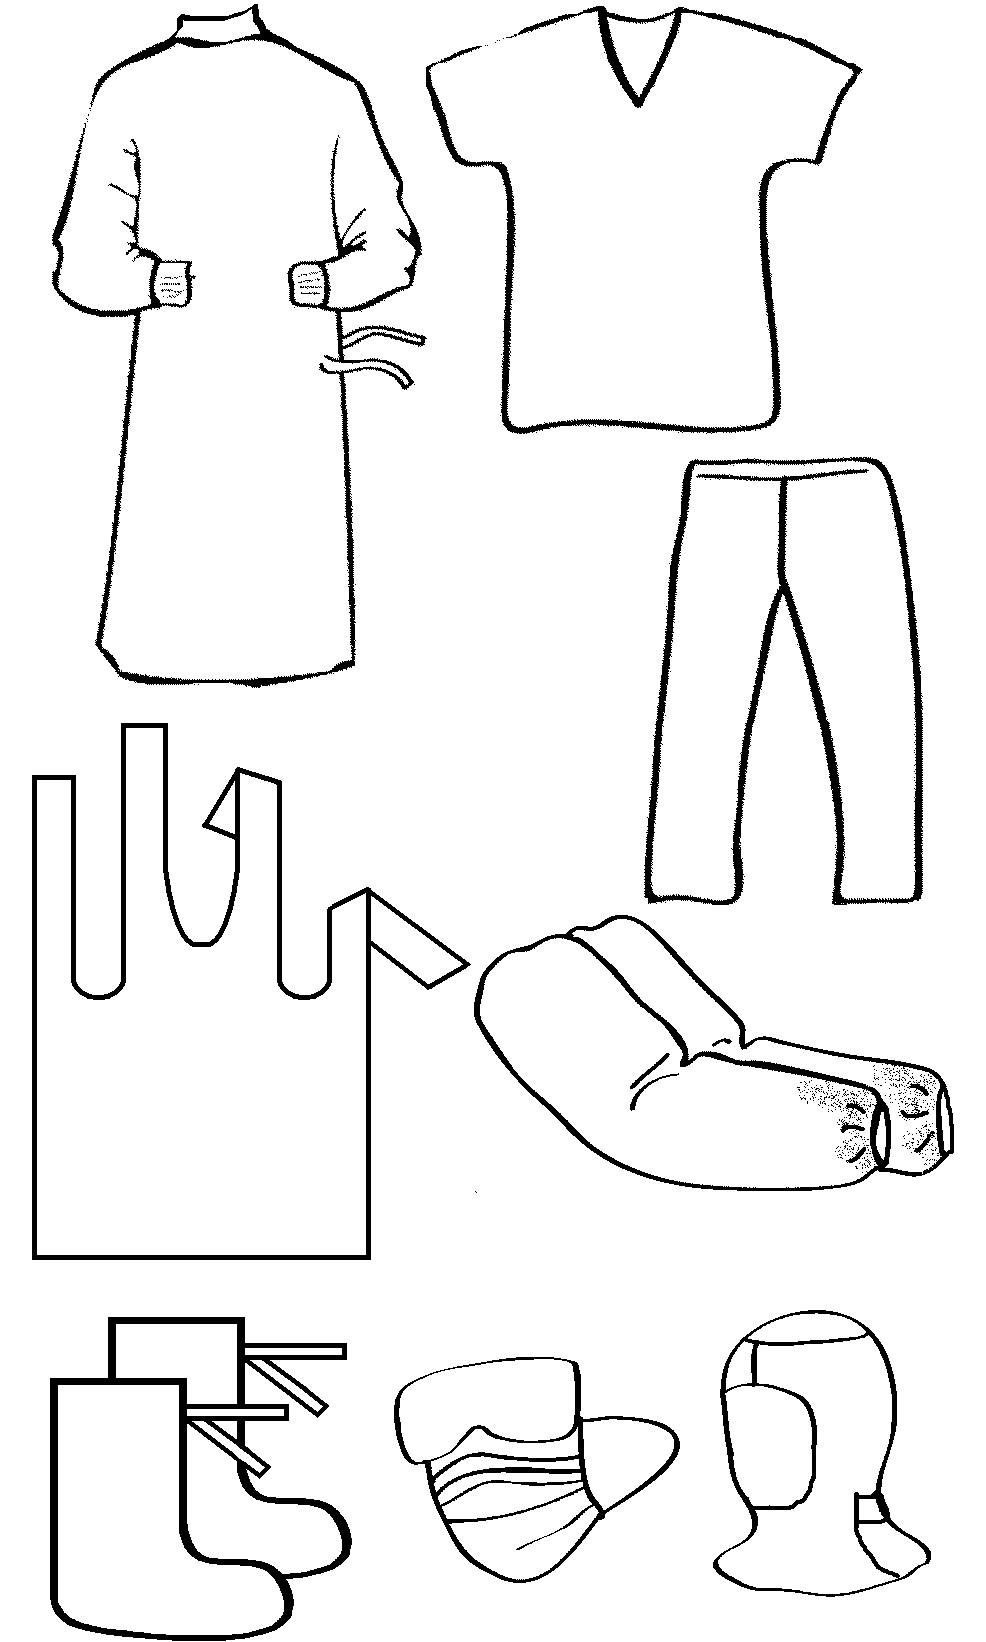 A set of surgical clothing (for enhanced protection) p. 52-54, sterile